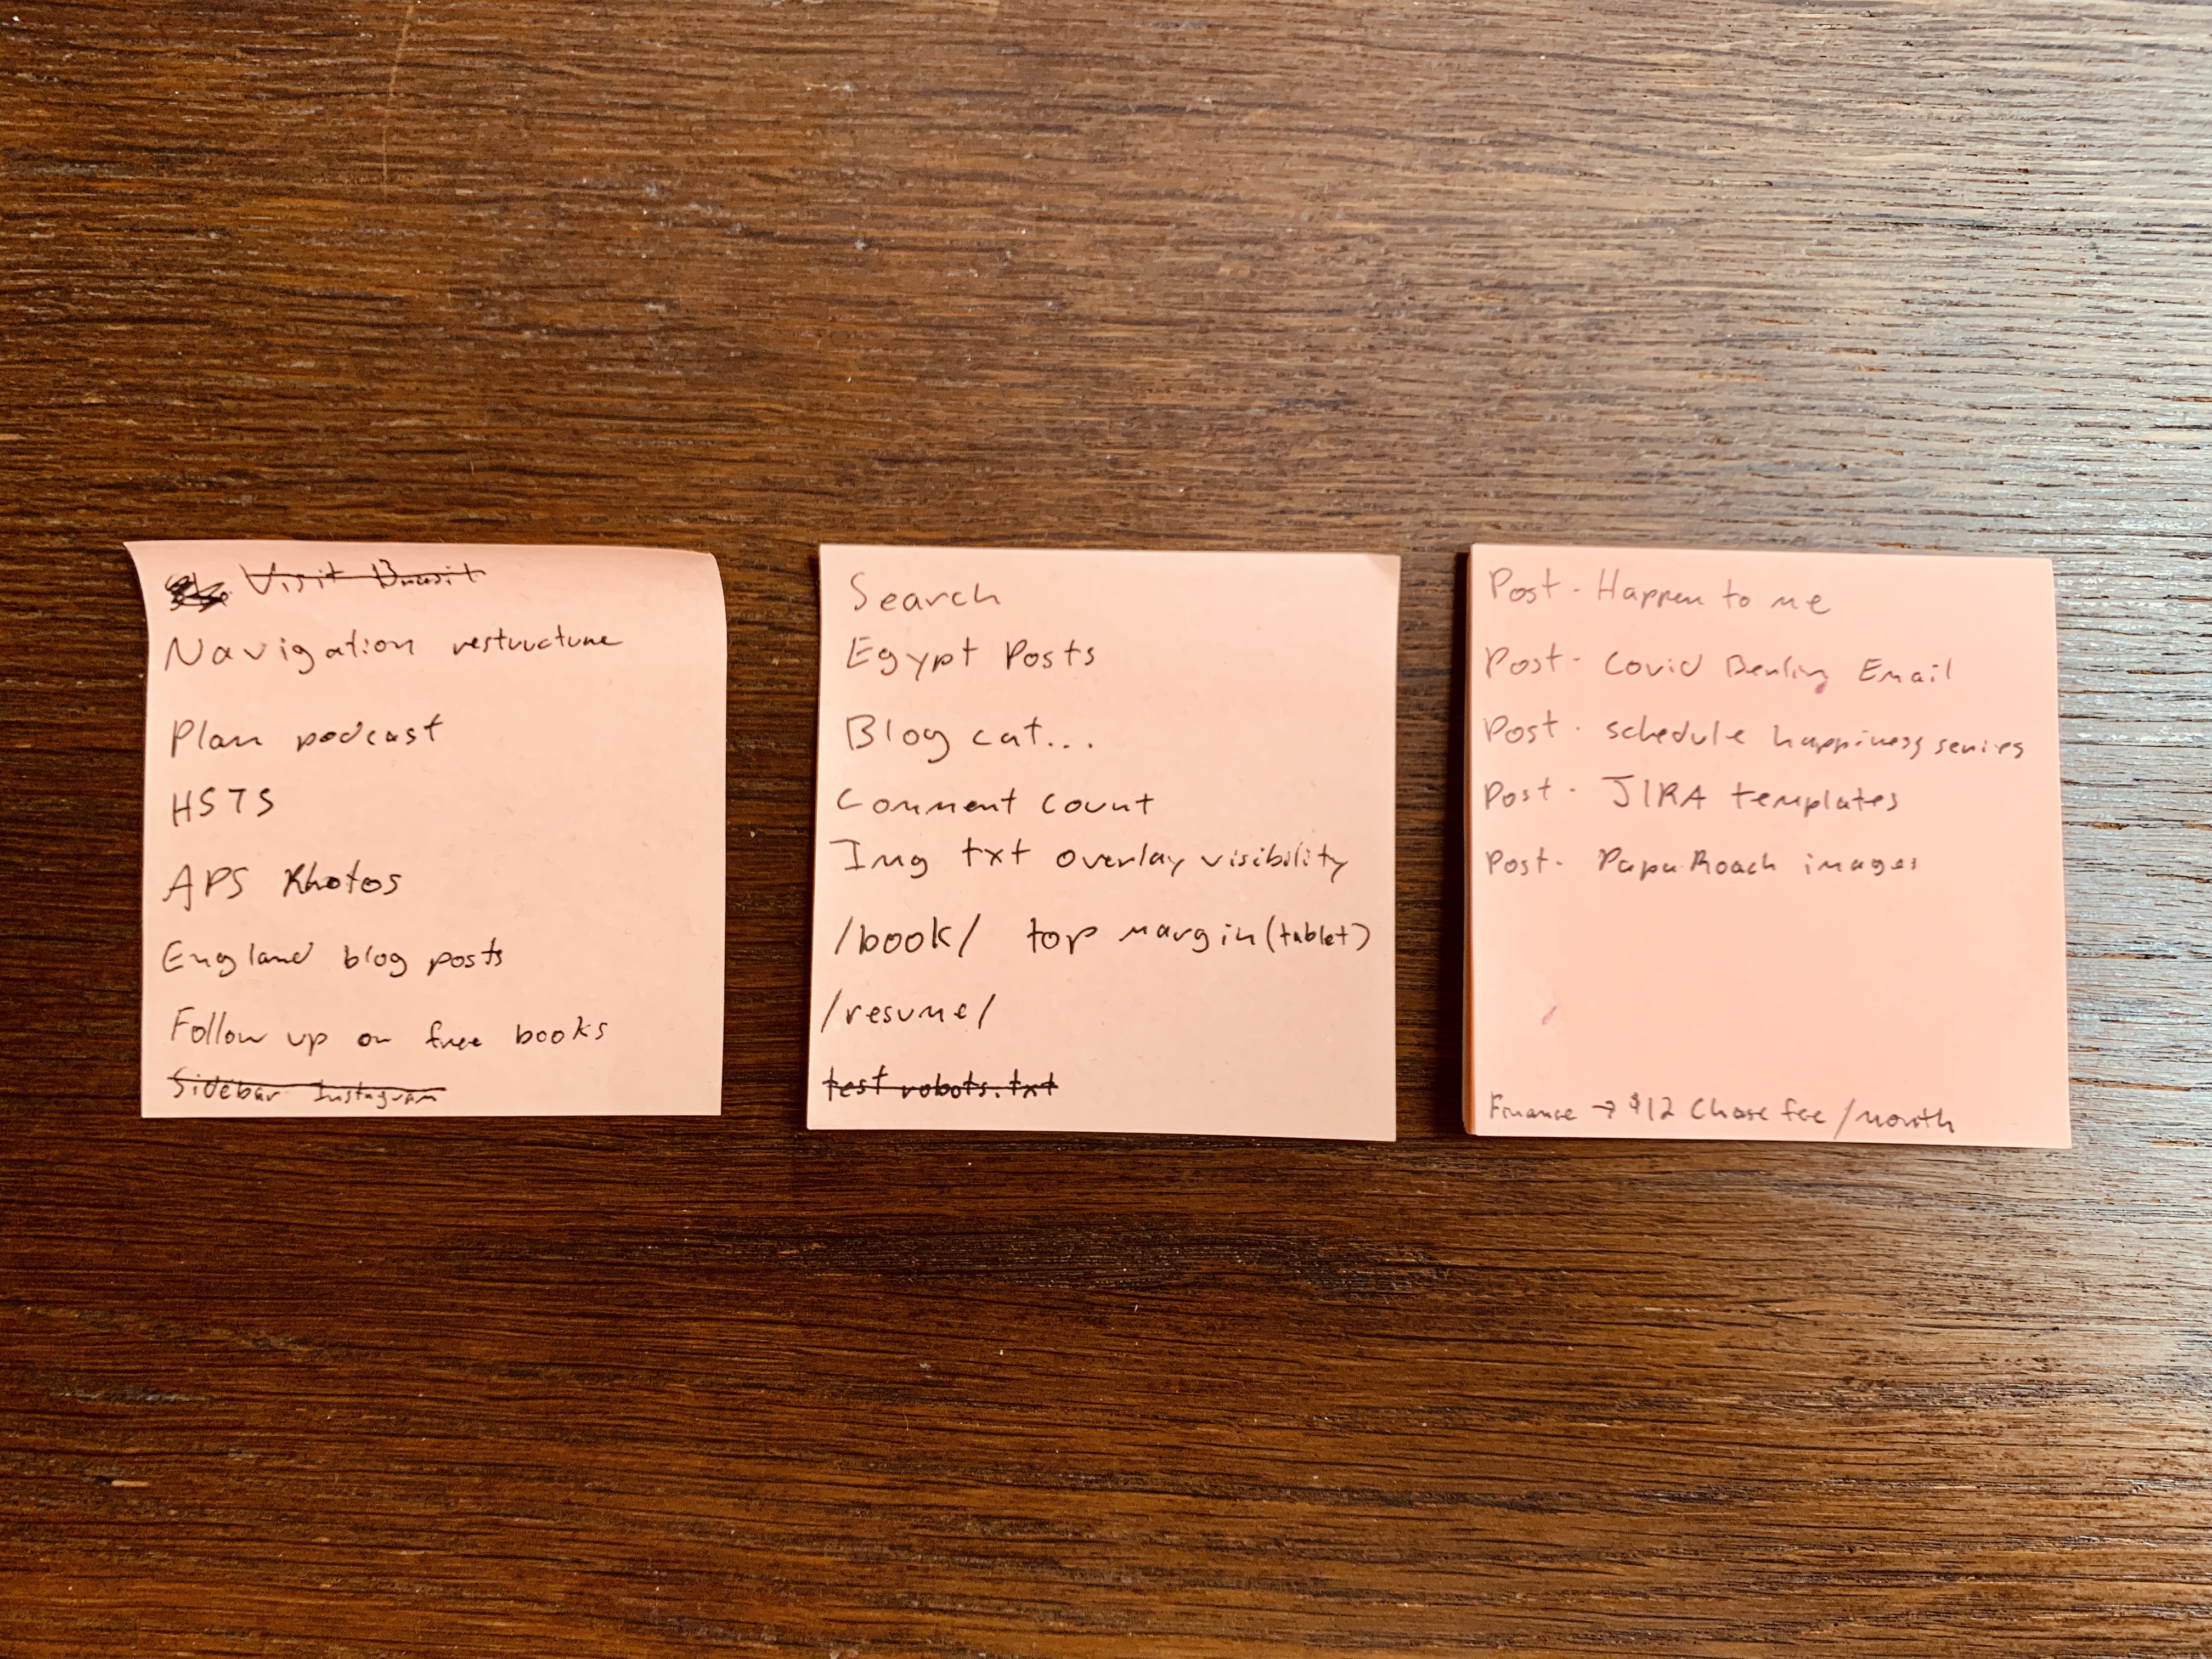 Three sticky notes with my to-do list